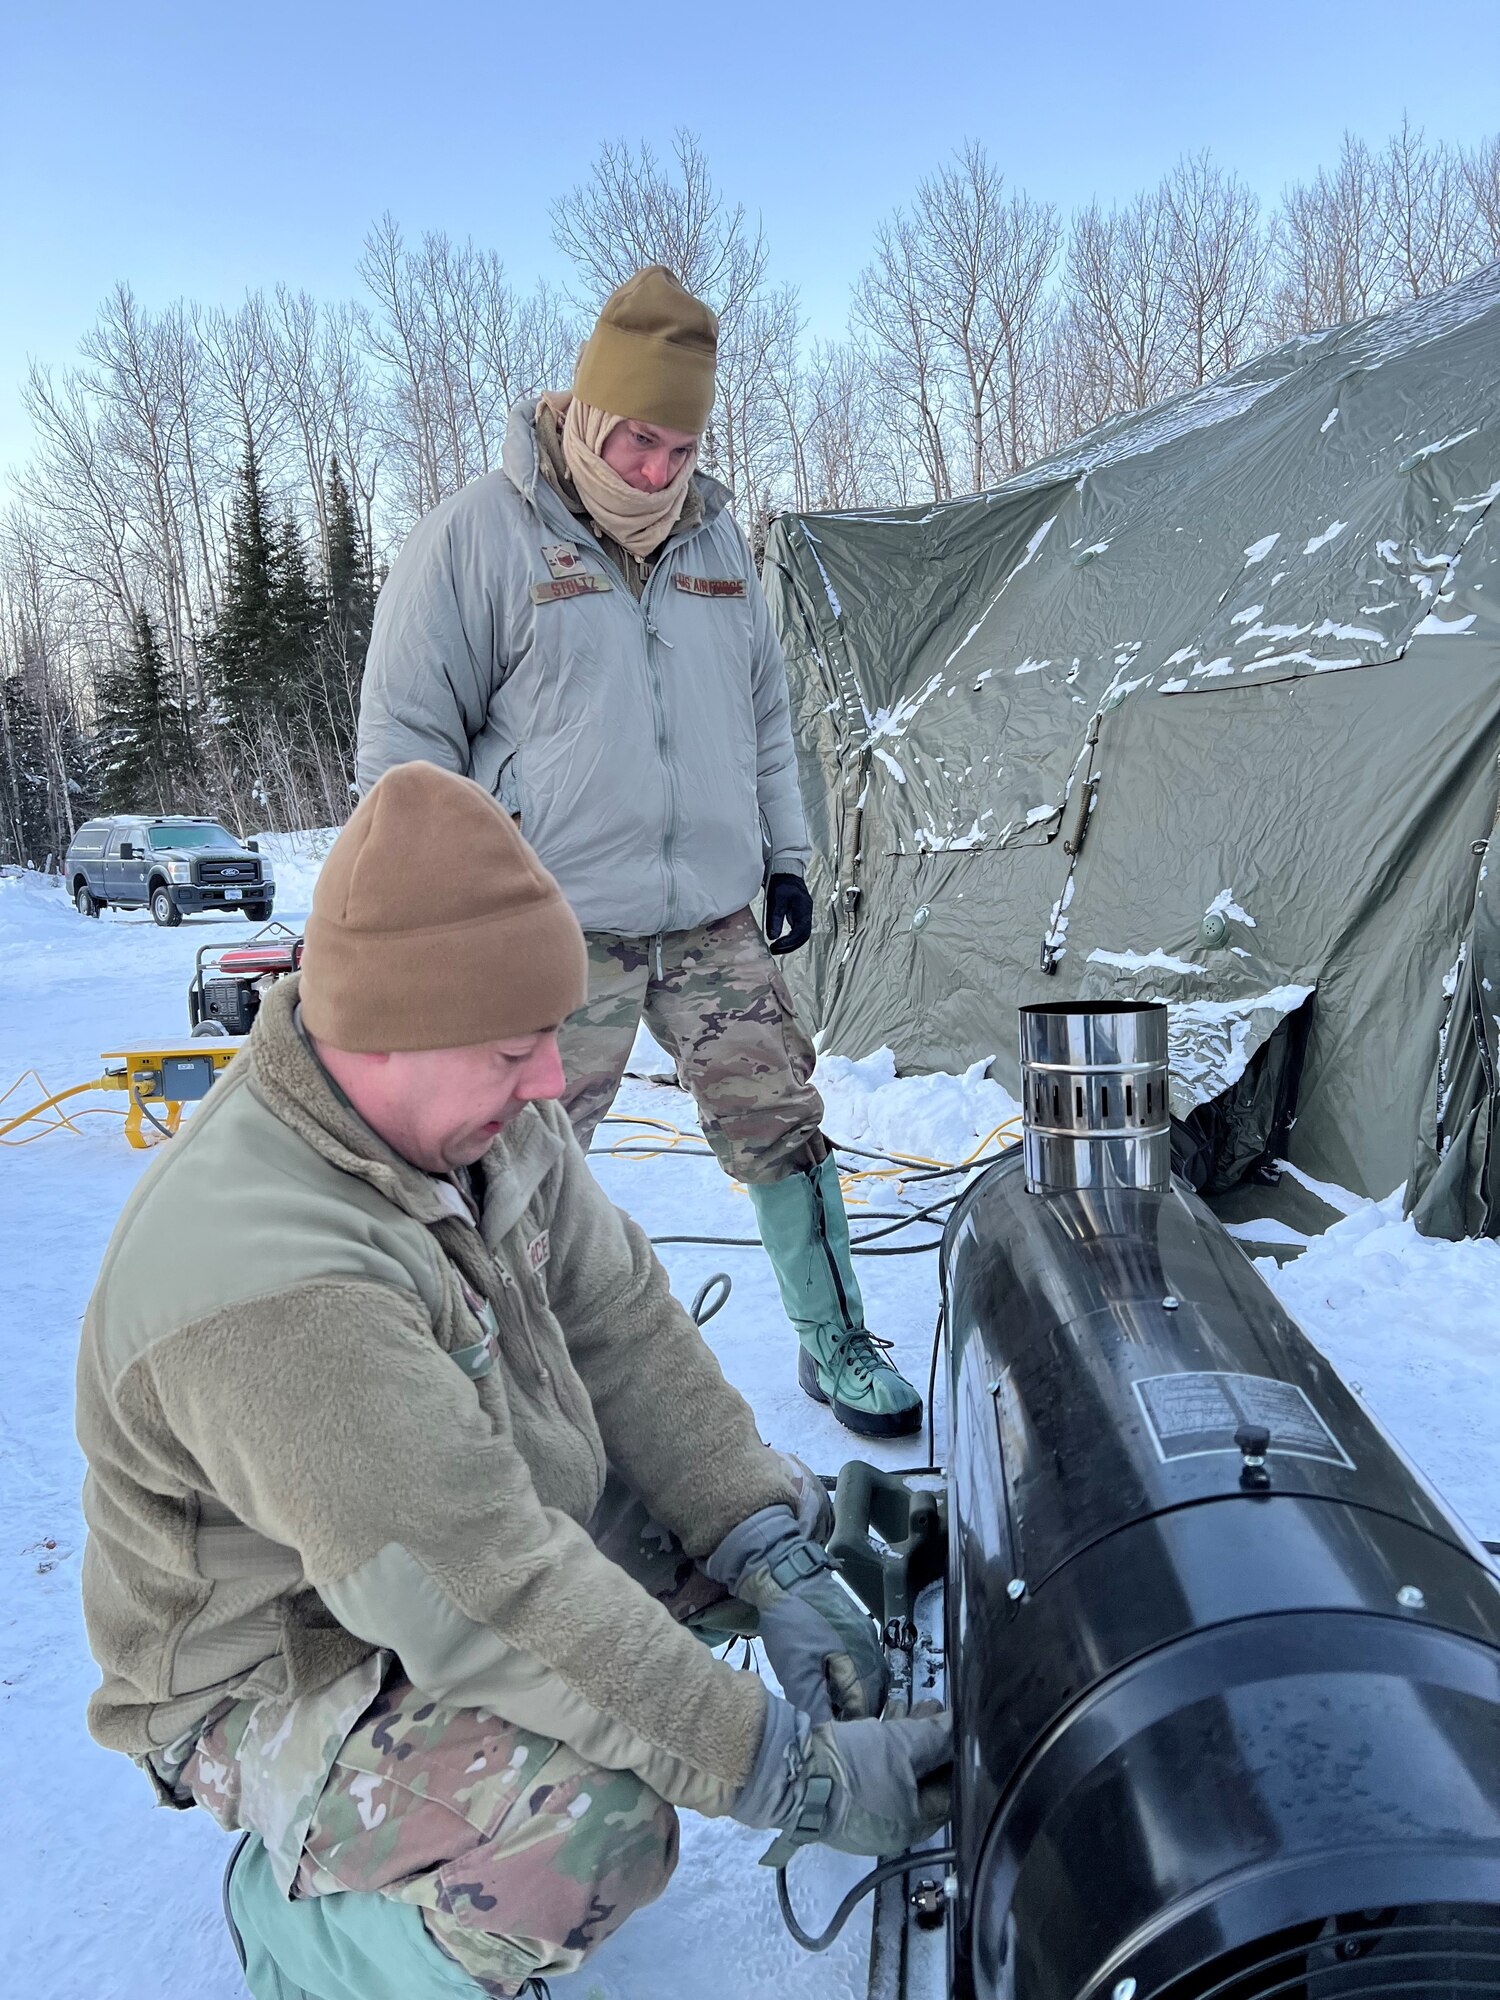 Radio Frequency Transmissions specialists from the 148th Fighter Wing and 133rd Airlift Wing troubleshoot a diesel fired heater that heats work and living quarters during a winter training exercise in Northern Minnesota on January 30, 2023. Communications experts from the Minnesota National Guard, 133rd Airlift Wing and 148th Fighter Wing established a camp, including tents and communications equipment, in subzero temperatures in conjunction with the 2023 John Beargrease Sled Dog Marathon. The winter exercise allowed soldiers and airmen to set up, operationalize and troubleshoot equipment in adverse conditions in a remote location.